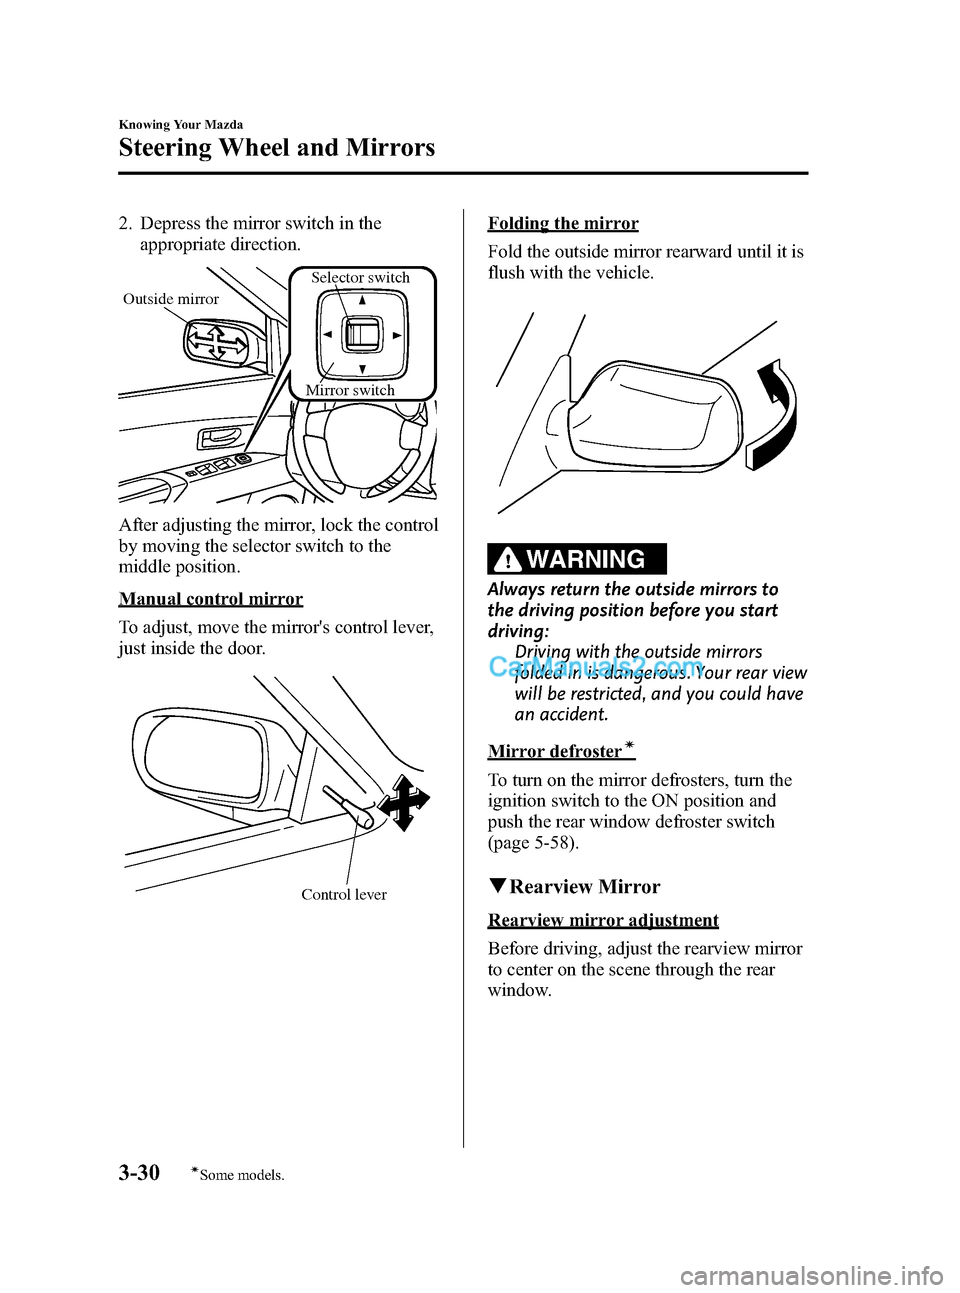 MAZDA MODEL MAZDASPEED 3 2008  Owners Manual (in English) Black plate (102,1)
2. Depress the mirror switch in the
appropriate direction.
Mirror switch
Outside mirror
Selector switch
After adjusting the mirror, lock the control
by moving the selector switch t